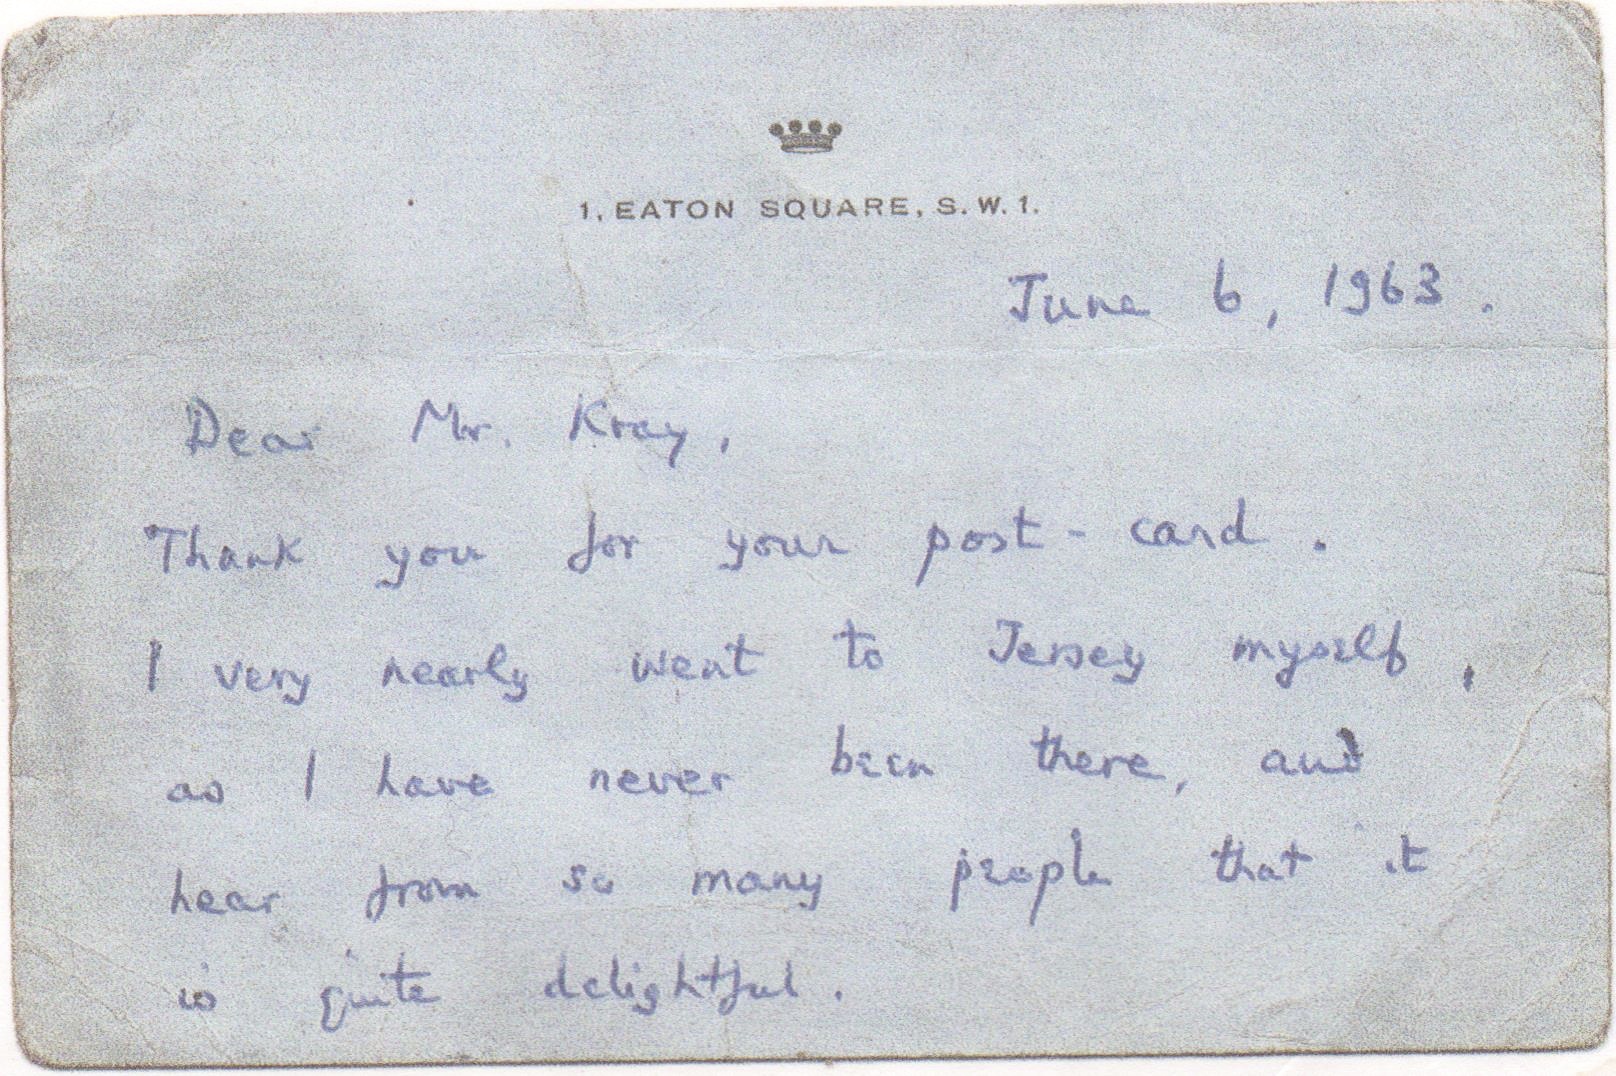 The note from Lord Boothby to Ronnie Kray (26100579)